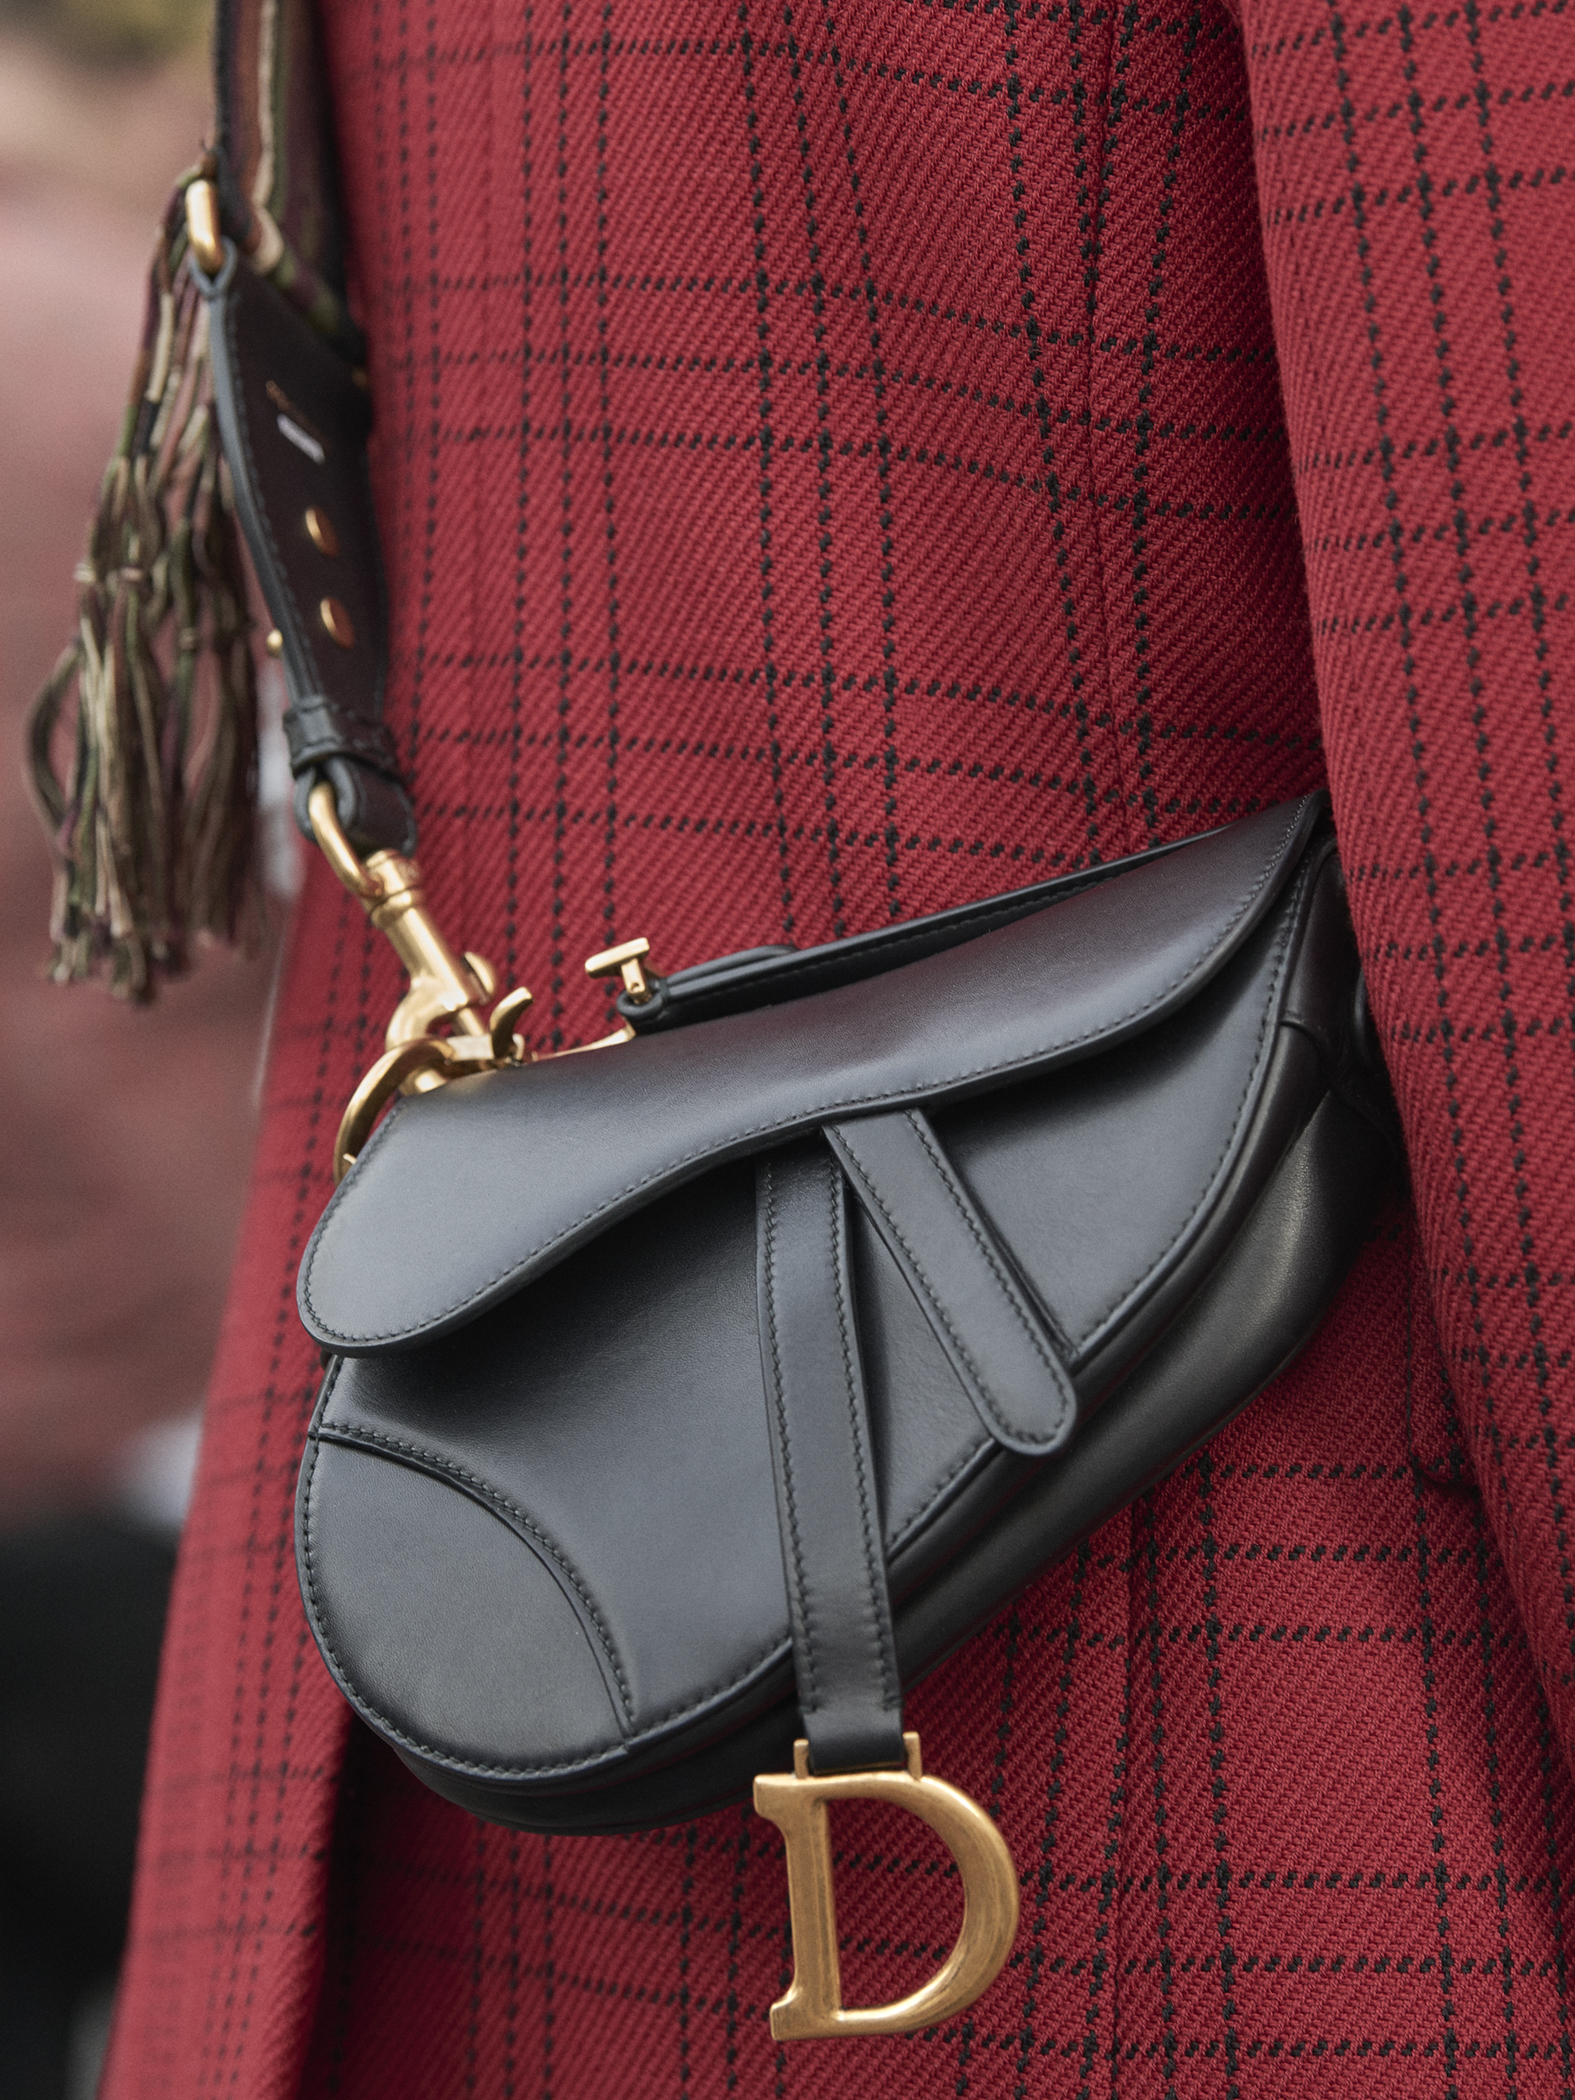 The unique history of Dior's Saddle Bag: 1999 - 2022